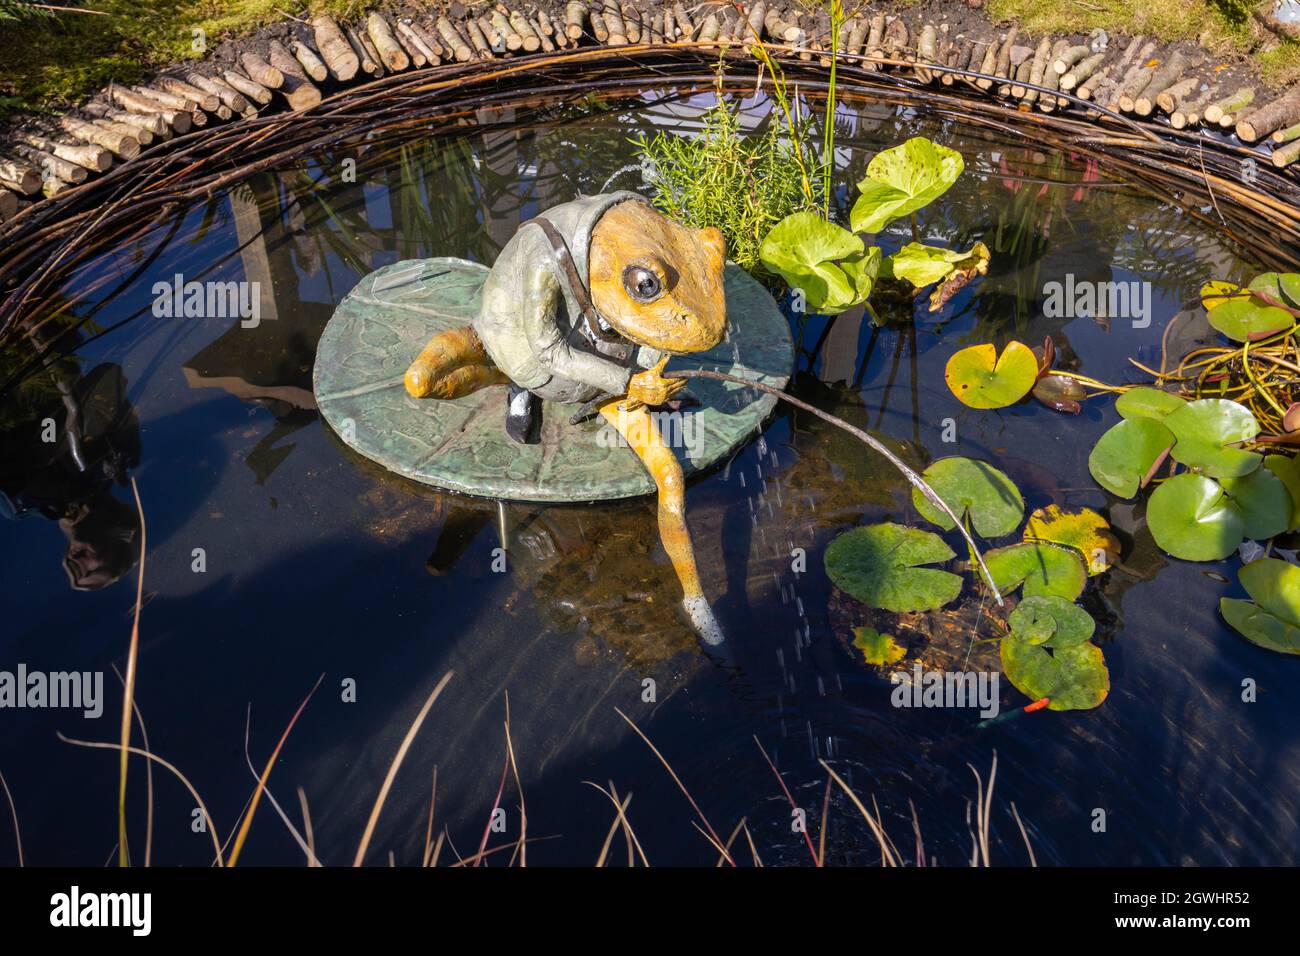 https://c8.alamy.com/comp/2GWHR52/garden-ornament-sculpture-by-robert-james-workshop-of-jeremy-fisher-frog-fishing-in-a-pond-at-rhs-chelsea-flower-show-london-sw3-in-september-2021-2GWHR52.jpg